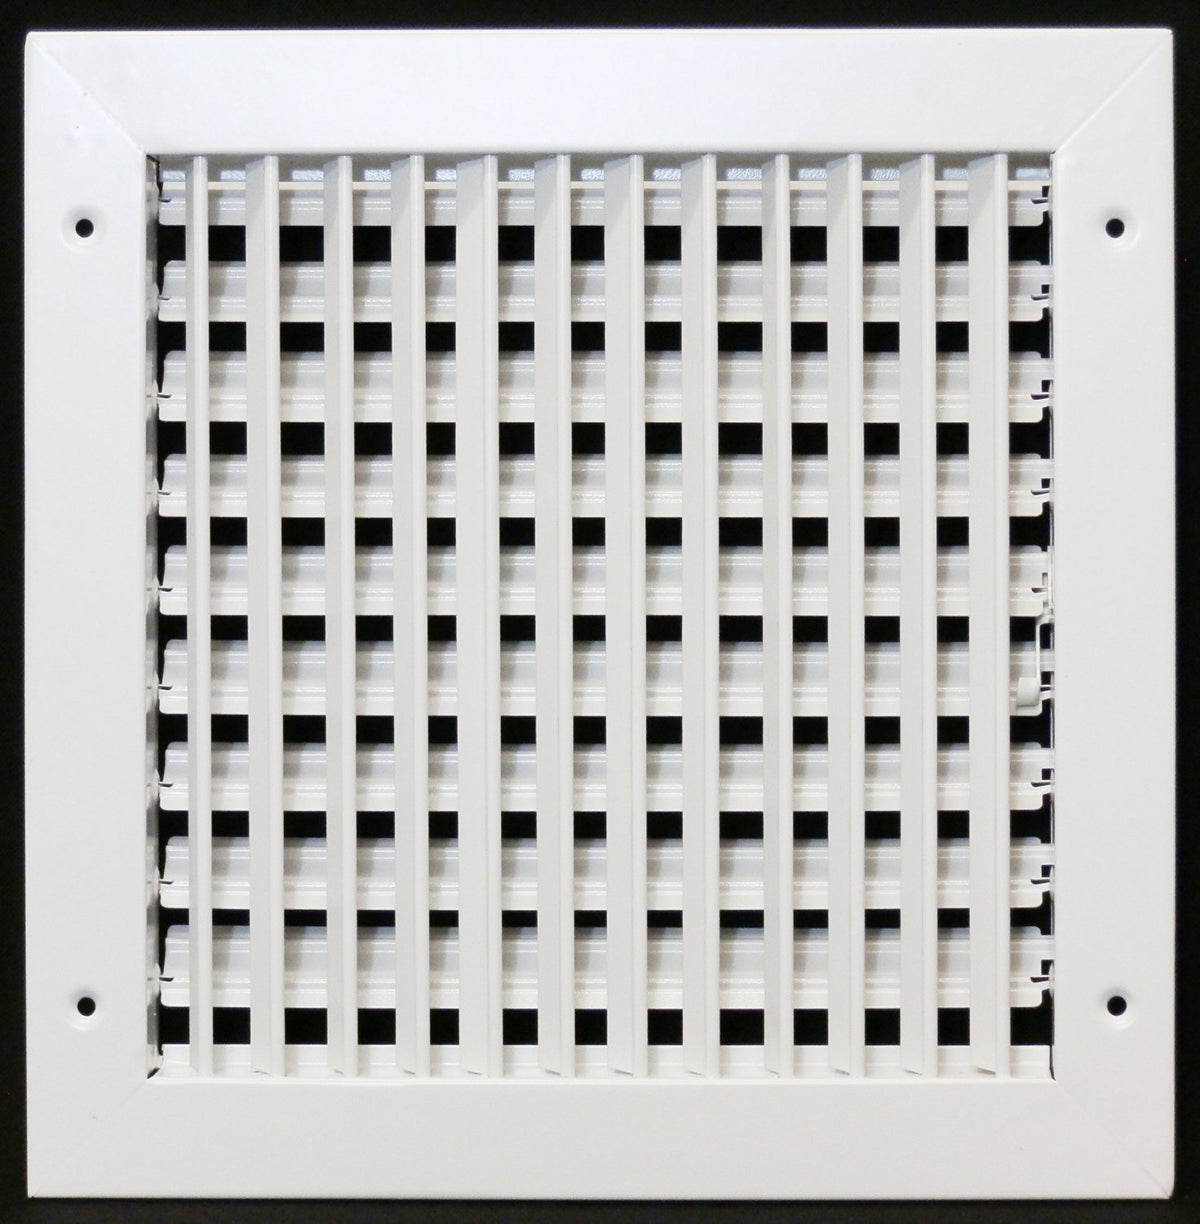 24&quot; X 30&quot; ADJUSTABLE AIR SUPPLY DIFFUSER - HVAC Vent Duct Cover Sidewall or Ceiling